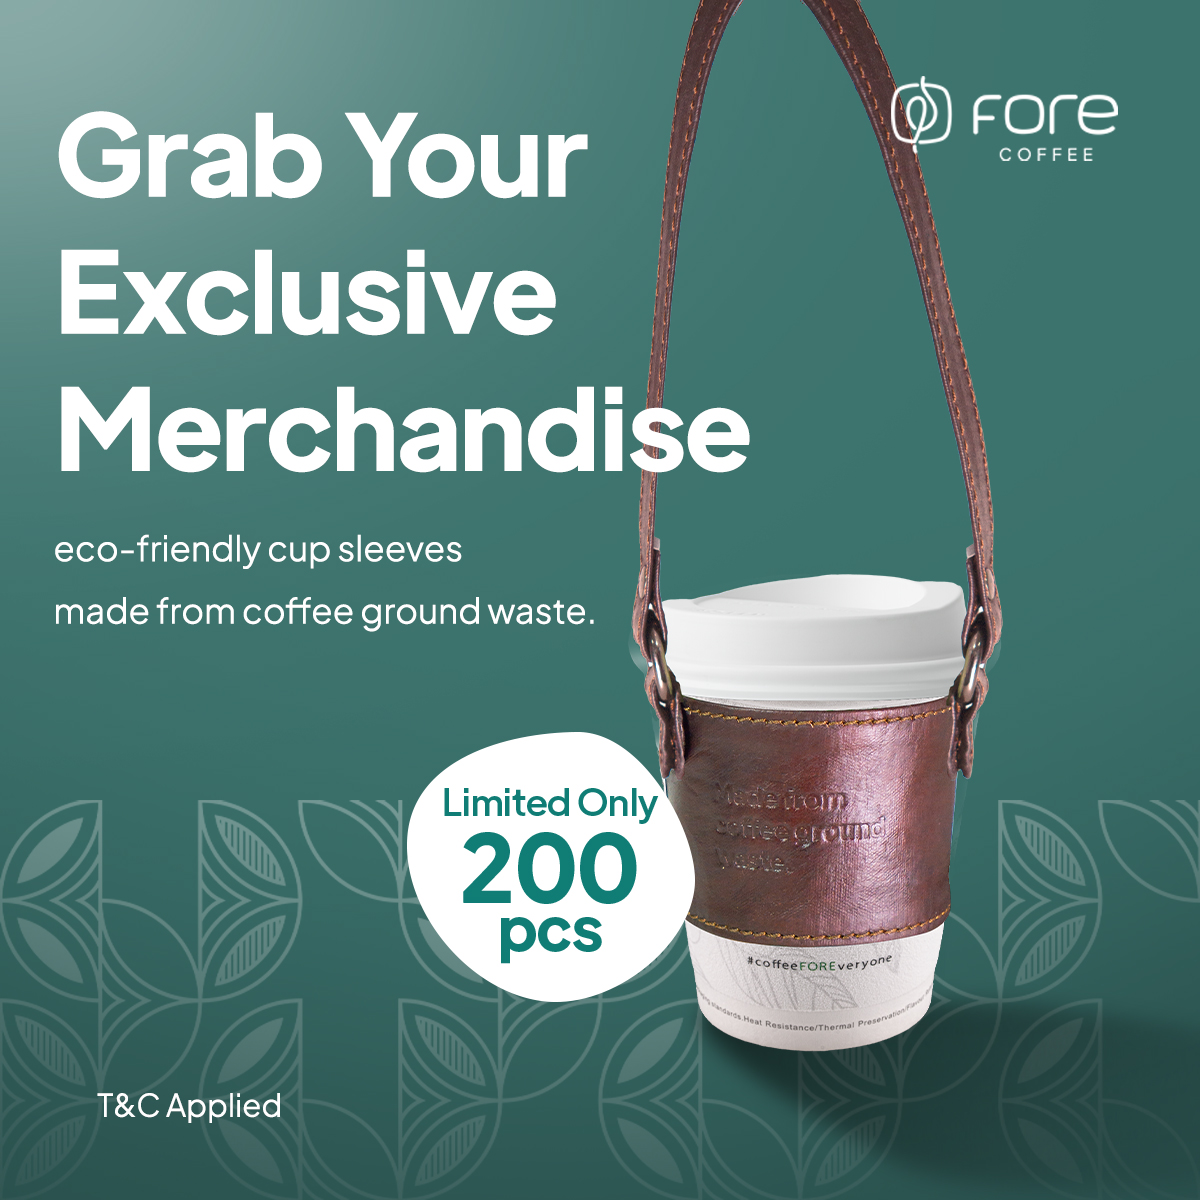 Exclusive merchandise at Fore Coffee Singapore